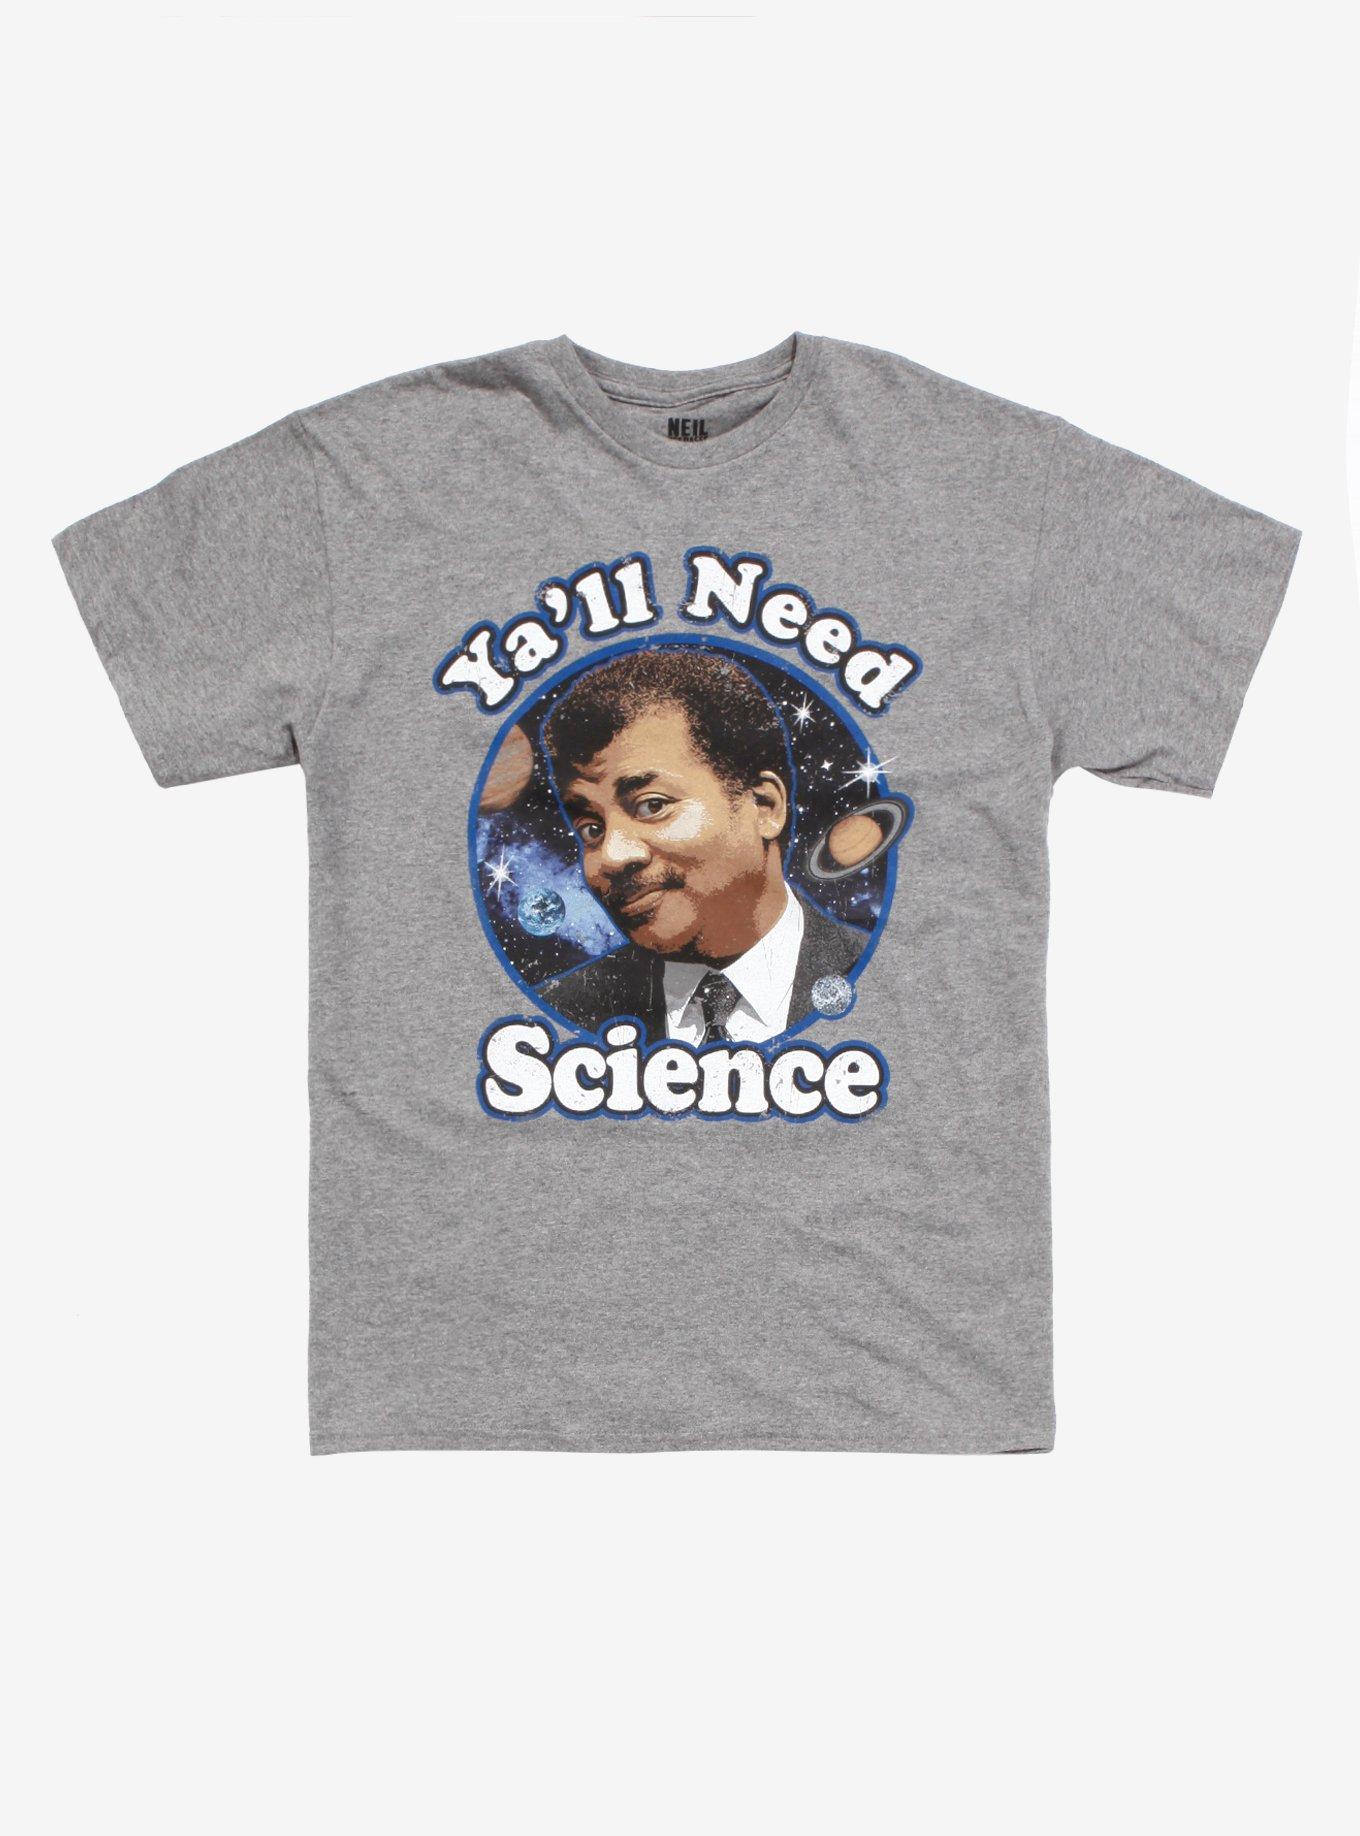 Neil Science | Hot Topic